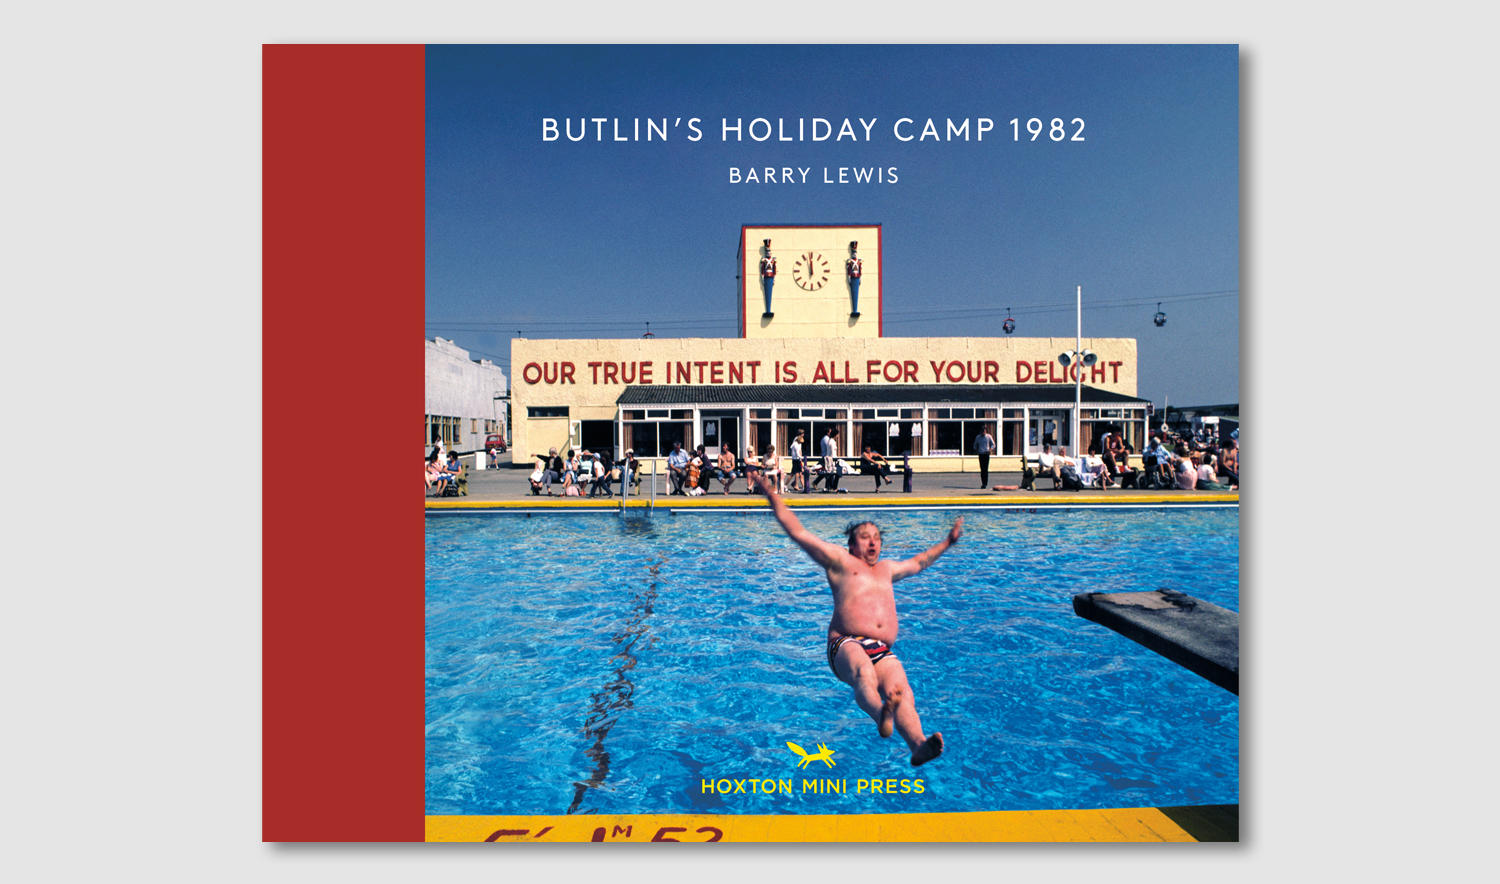 Barry Lewis - Butlin’s Holiday Camp 1982